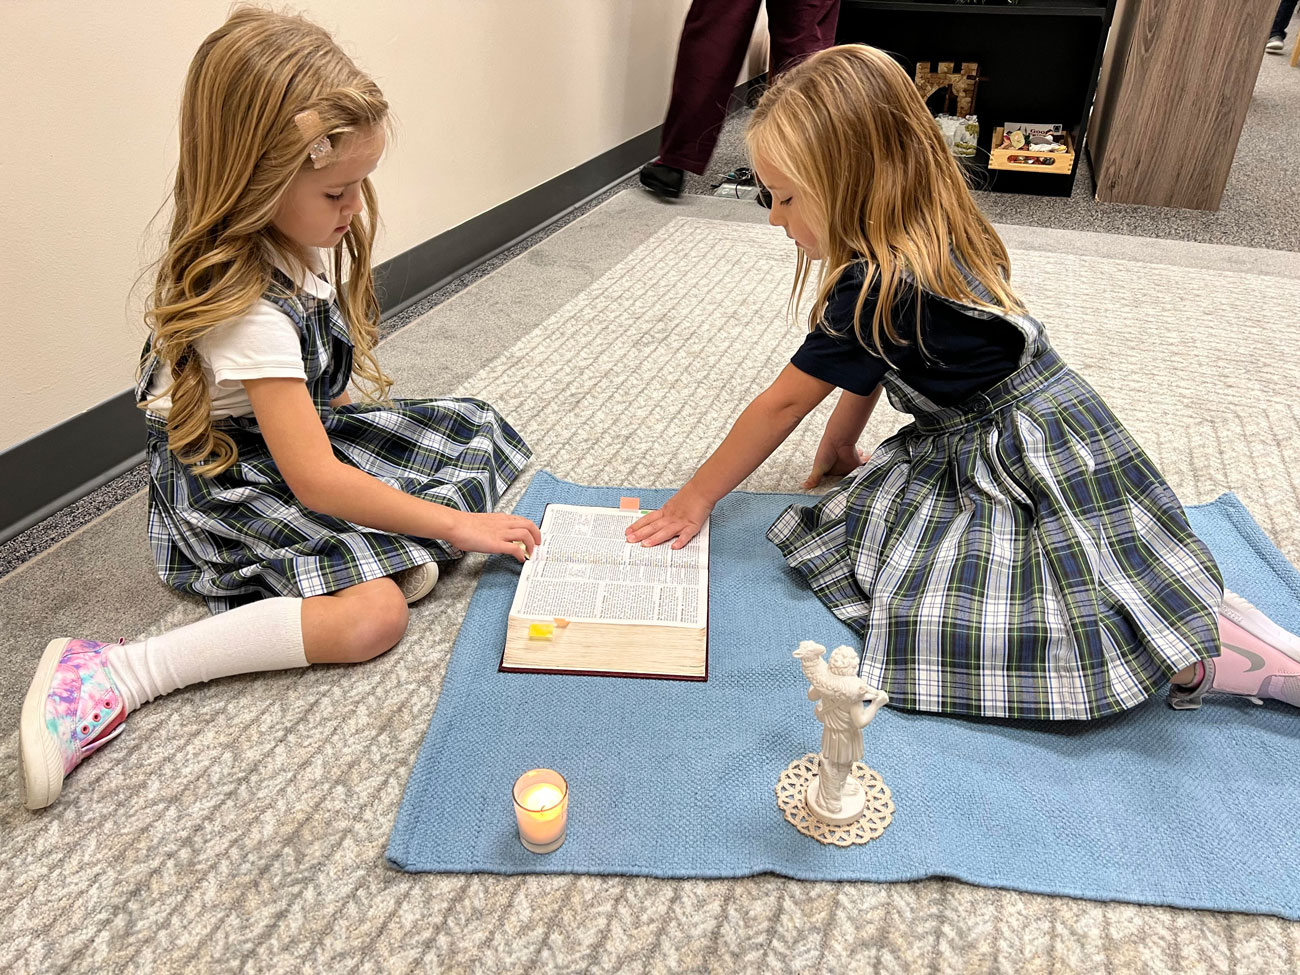 Two young girls reading a religious book on a blue rug.